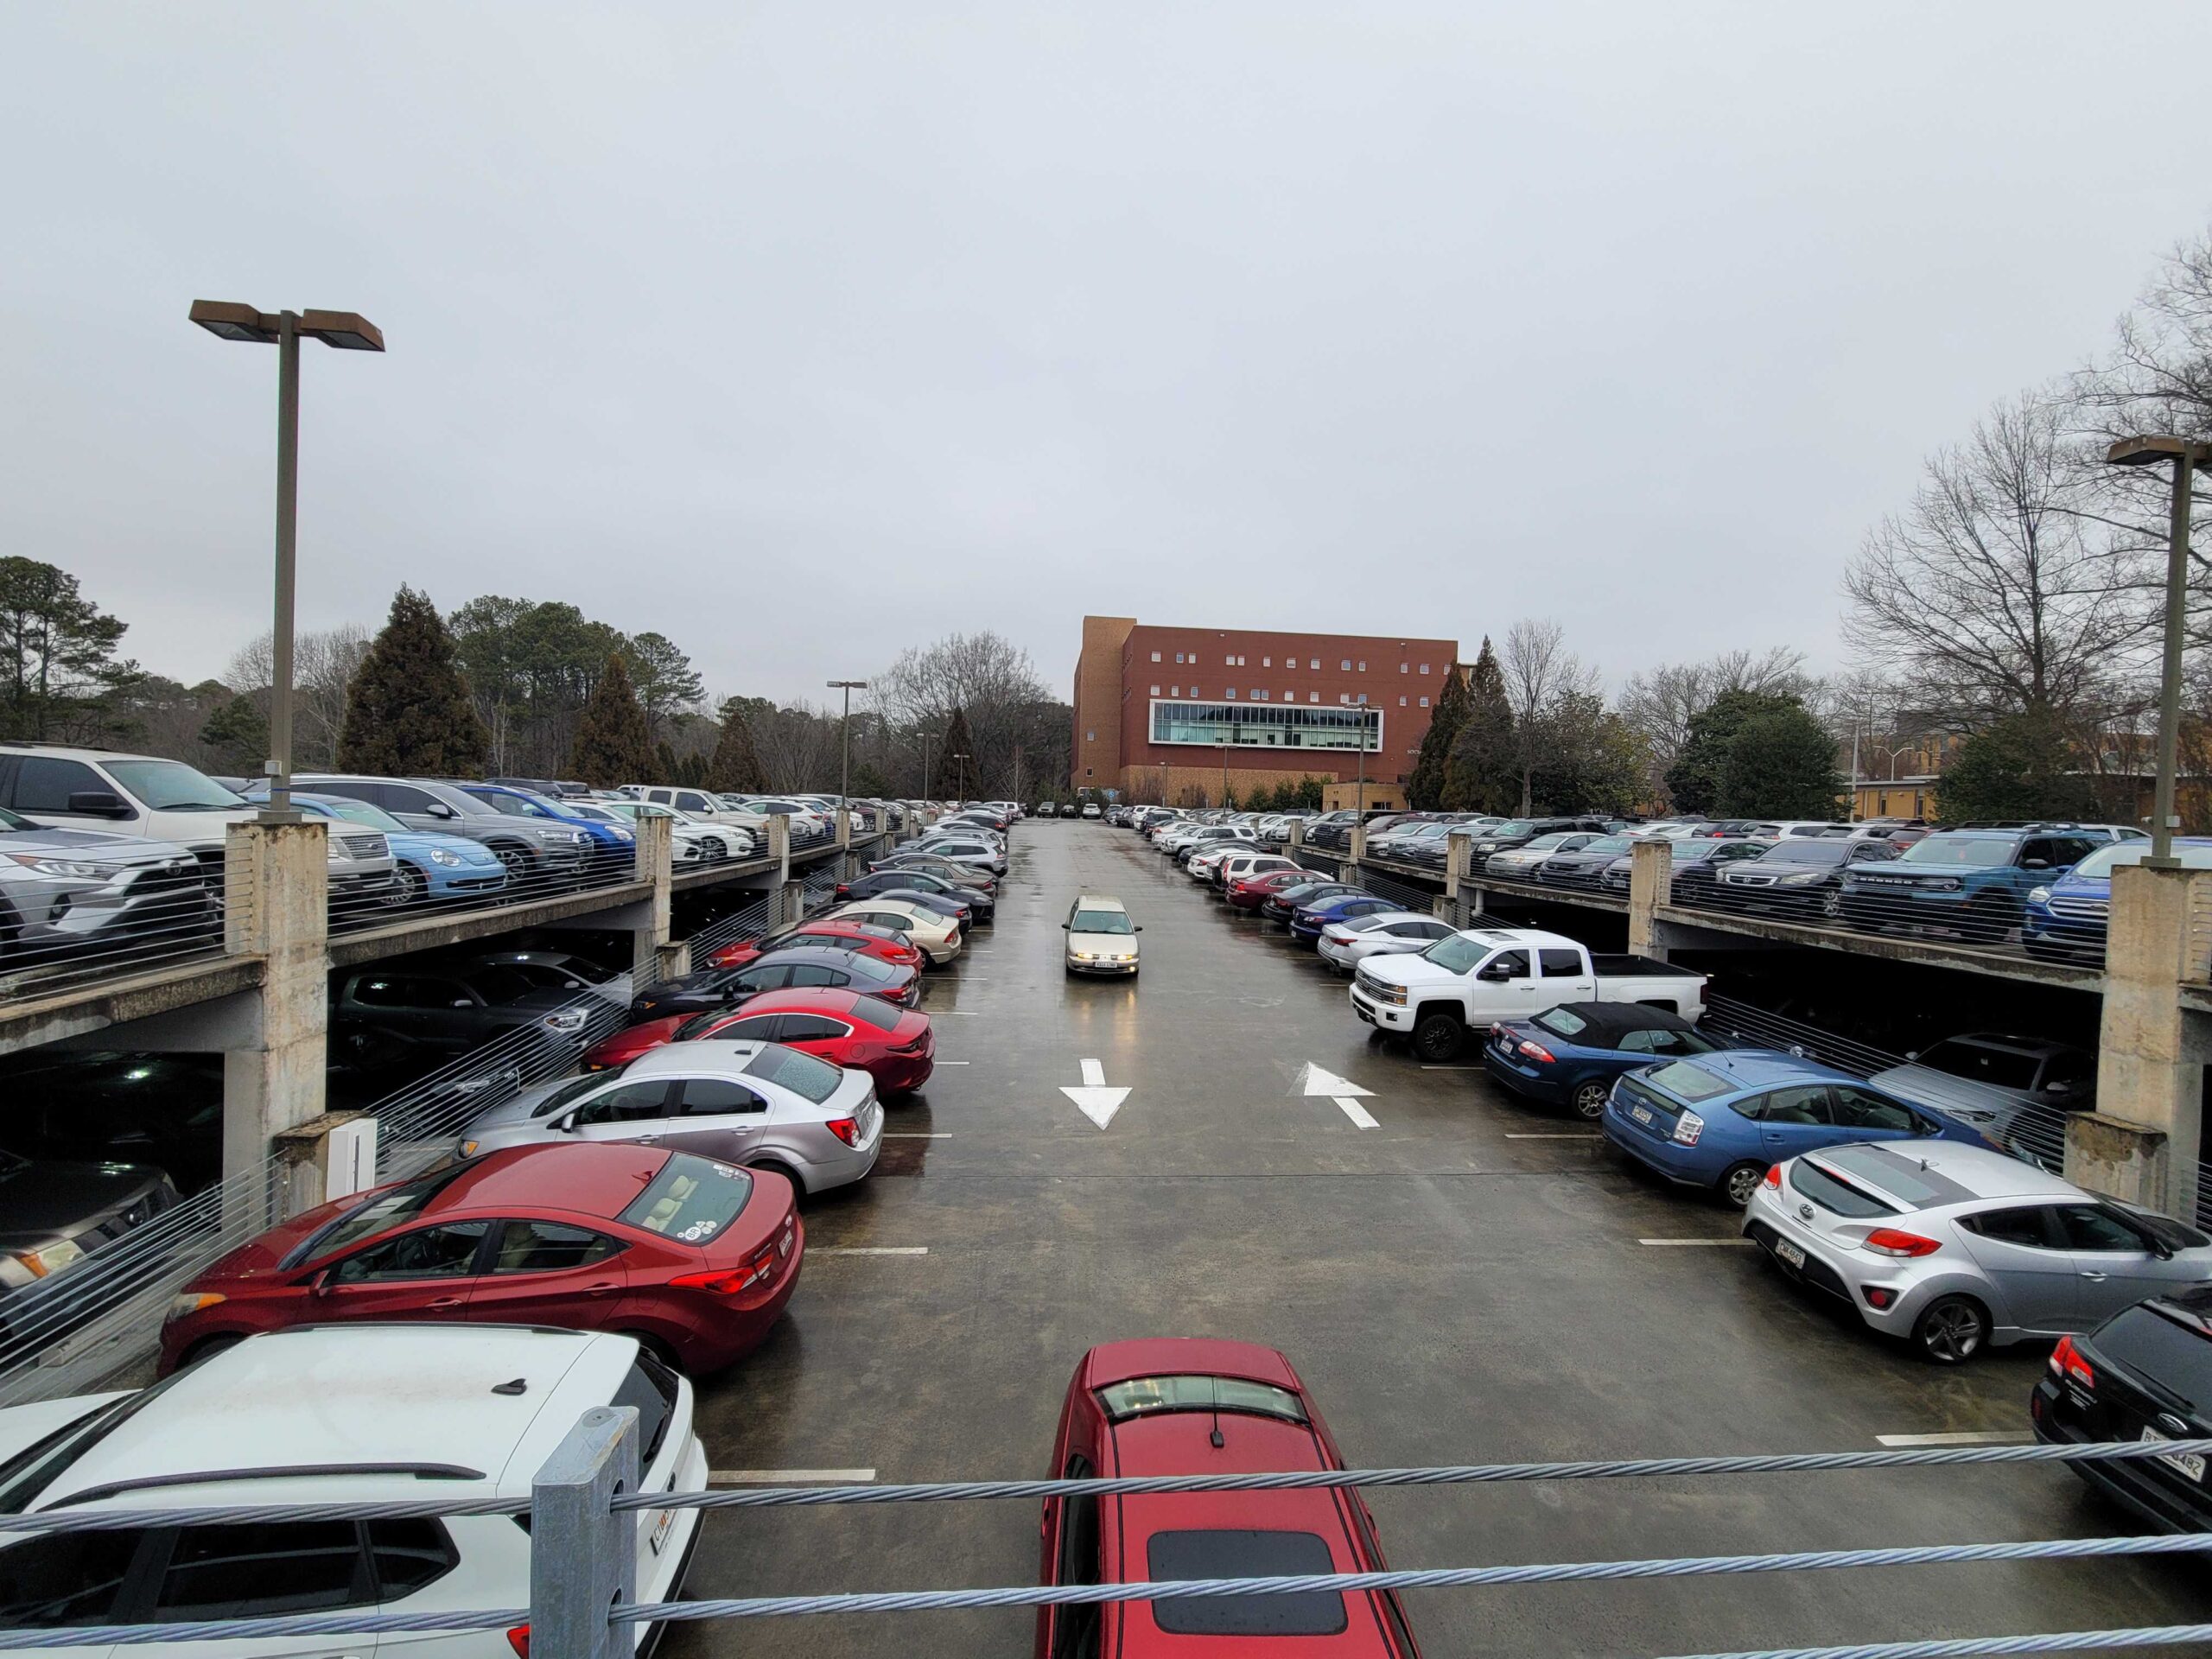 Student's struggling to find parking as West Deck runs out of spaces.